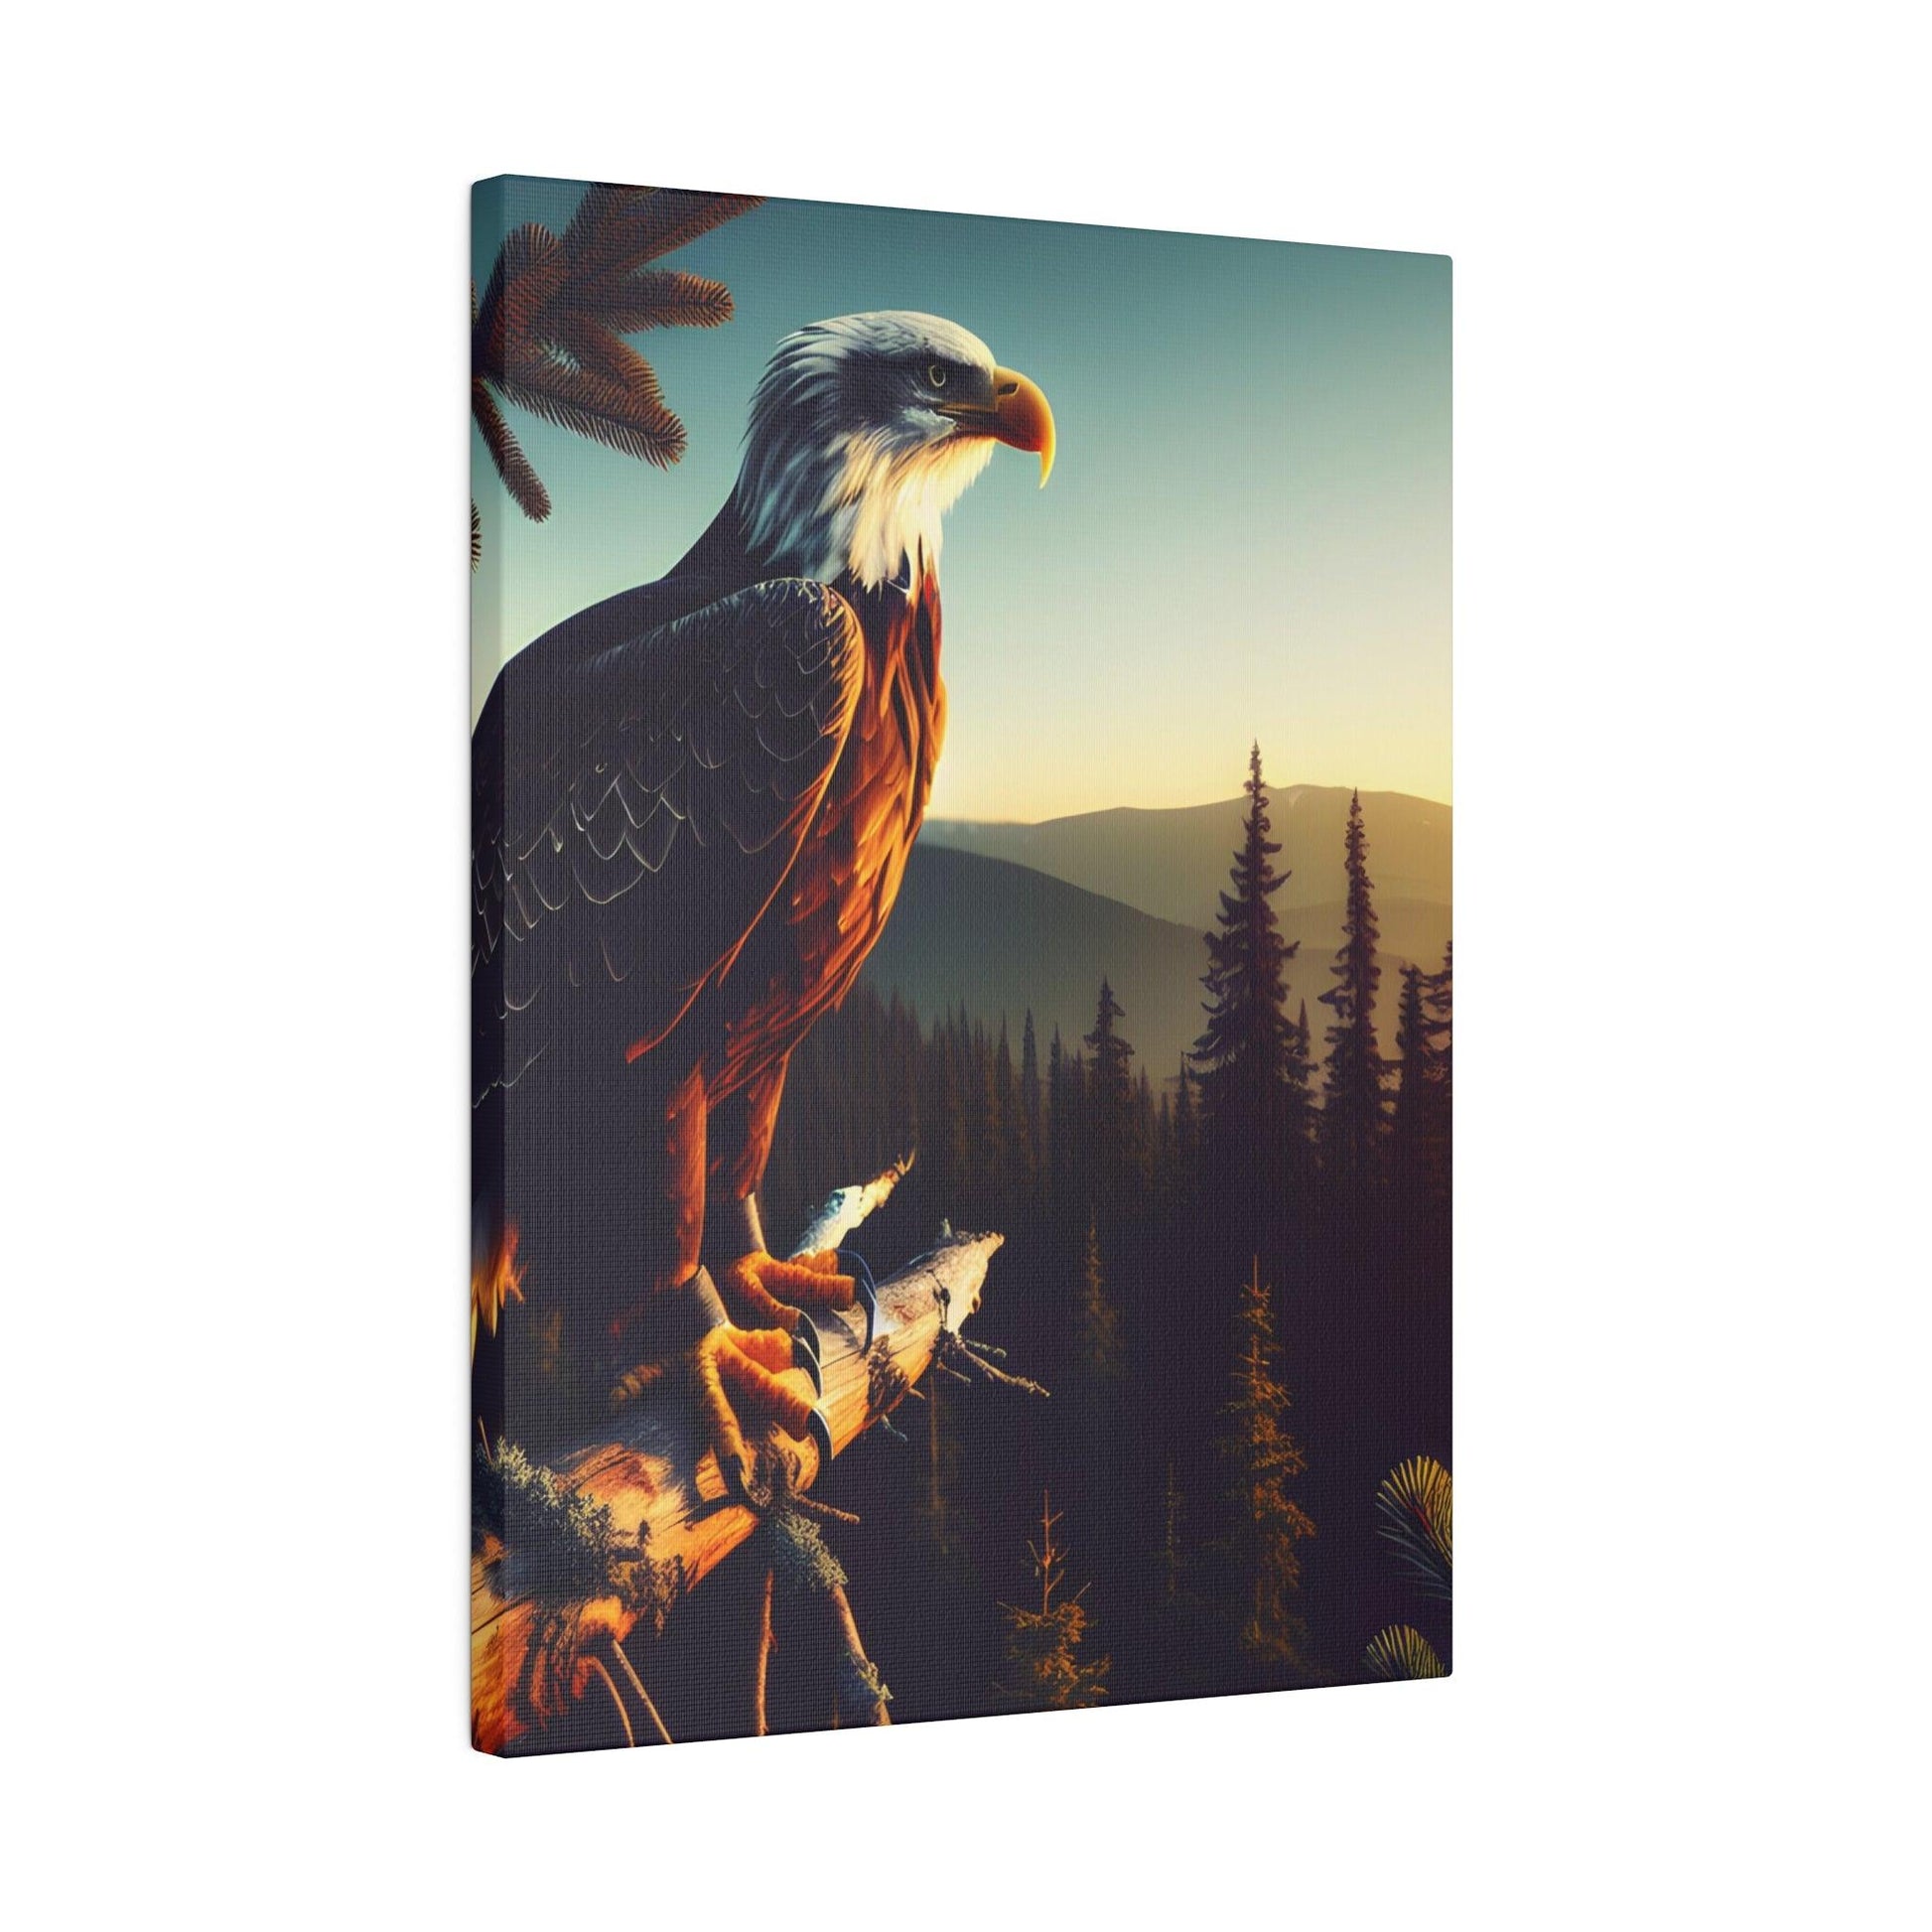 "Eagle's Majesty: Inspiring Canvas Wall Art" - The Alice Gallery